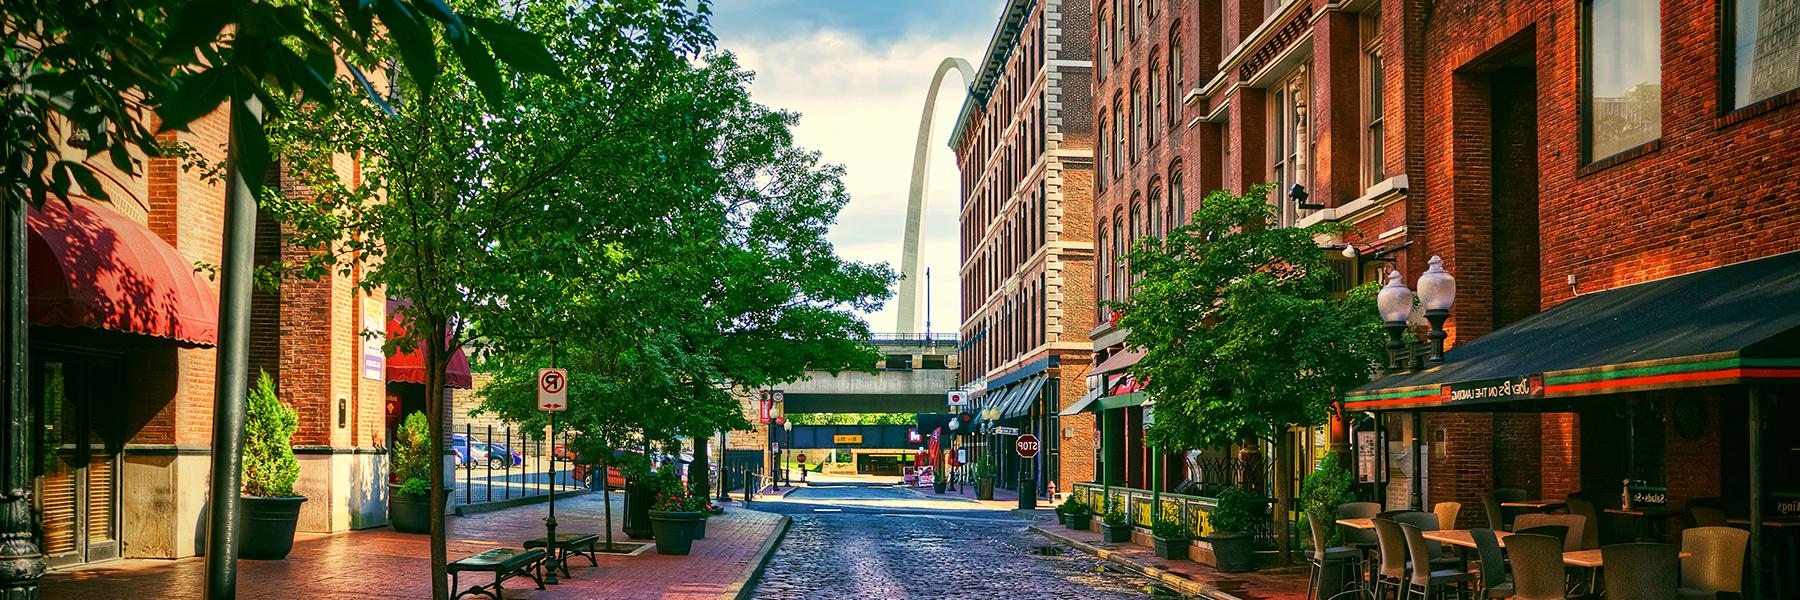 2 Days of French Sights In St Louis-Listed on the National Register of Historic Places, the cobblestone-paved Lacledes Landing sits on the banks of the the Mississippi River